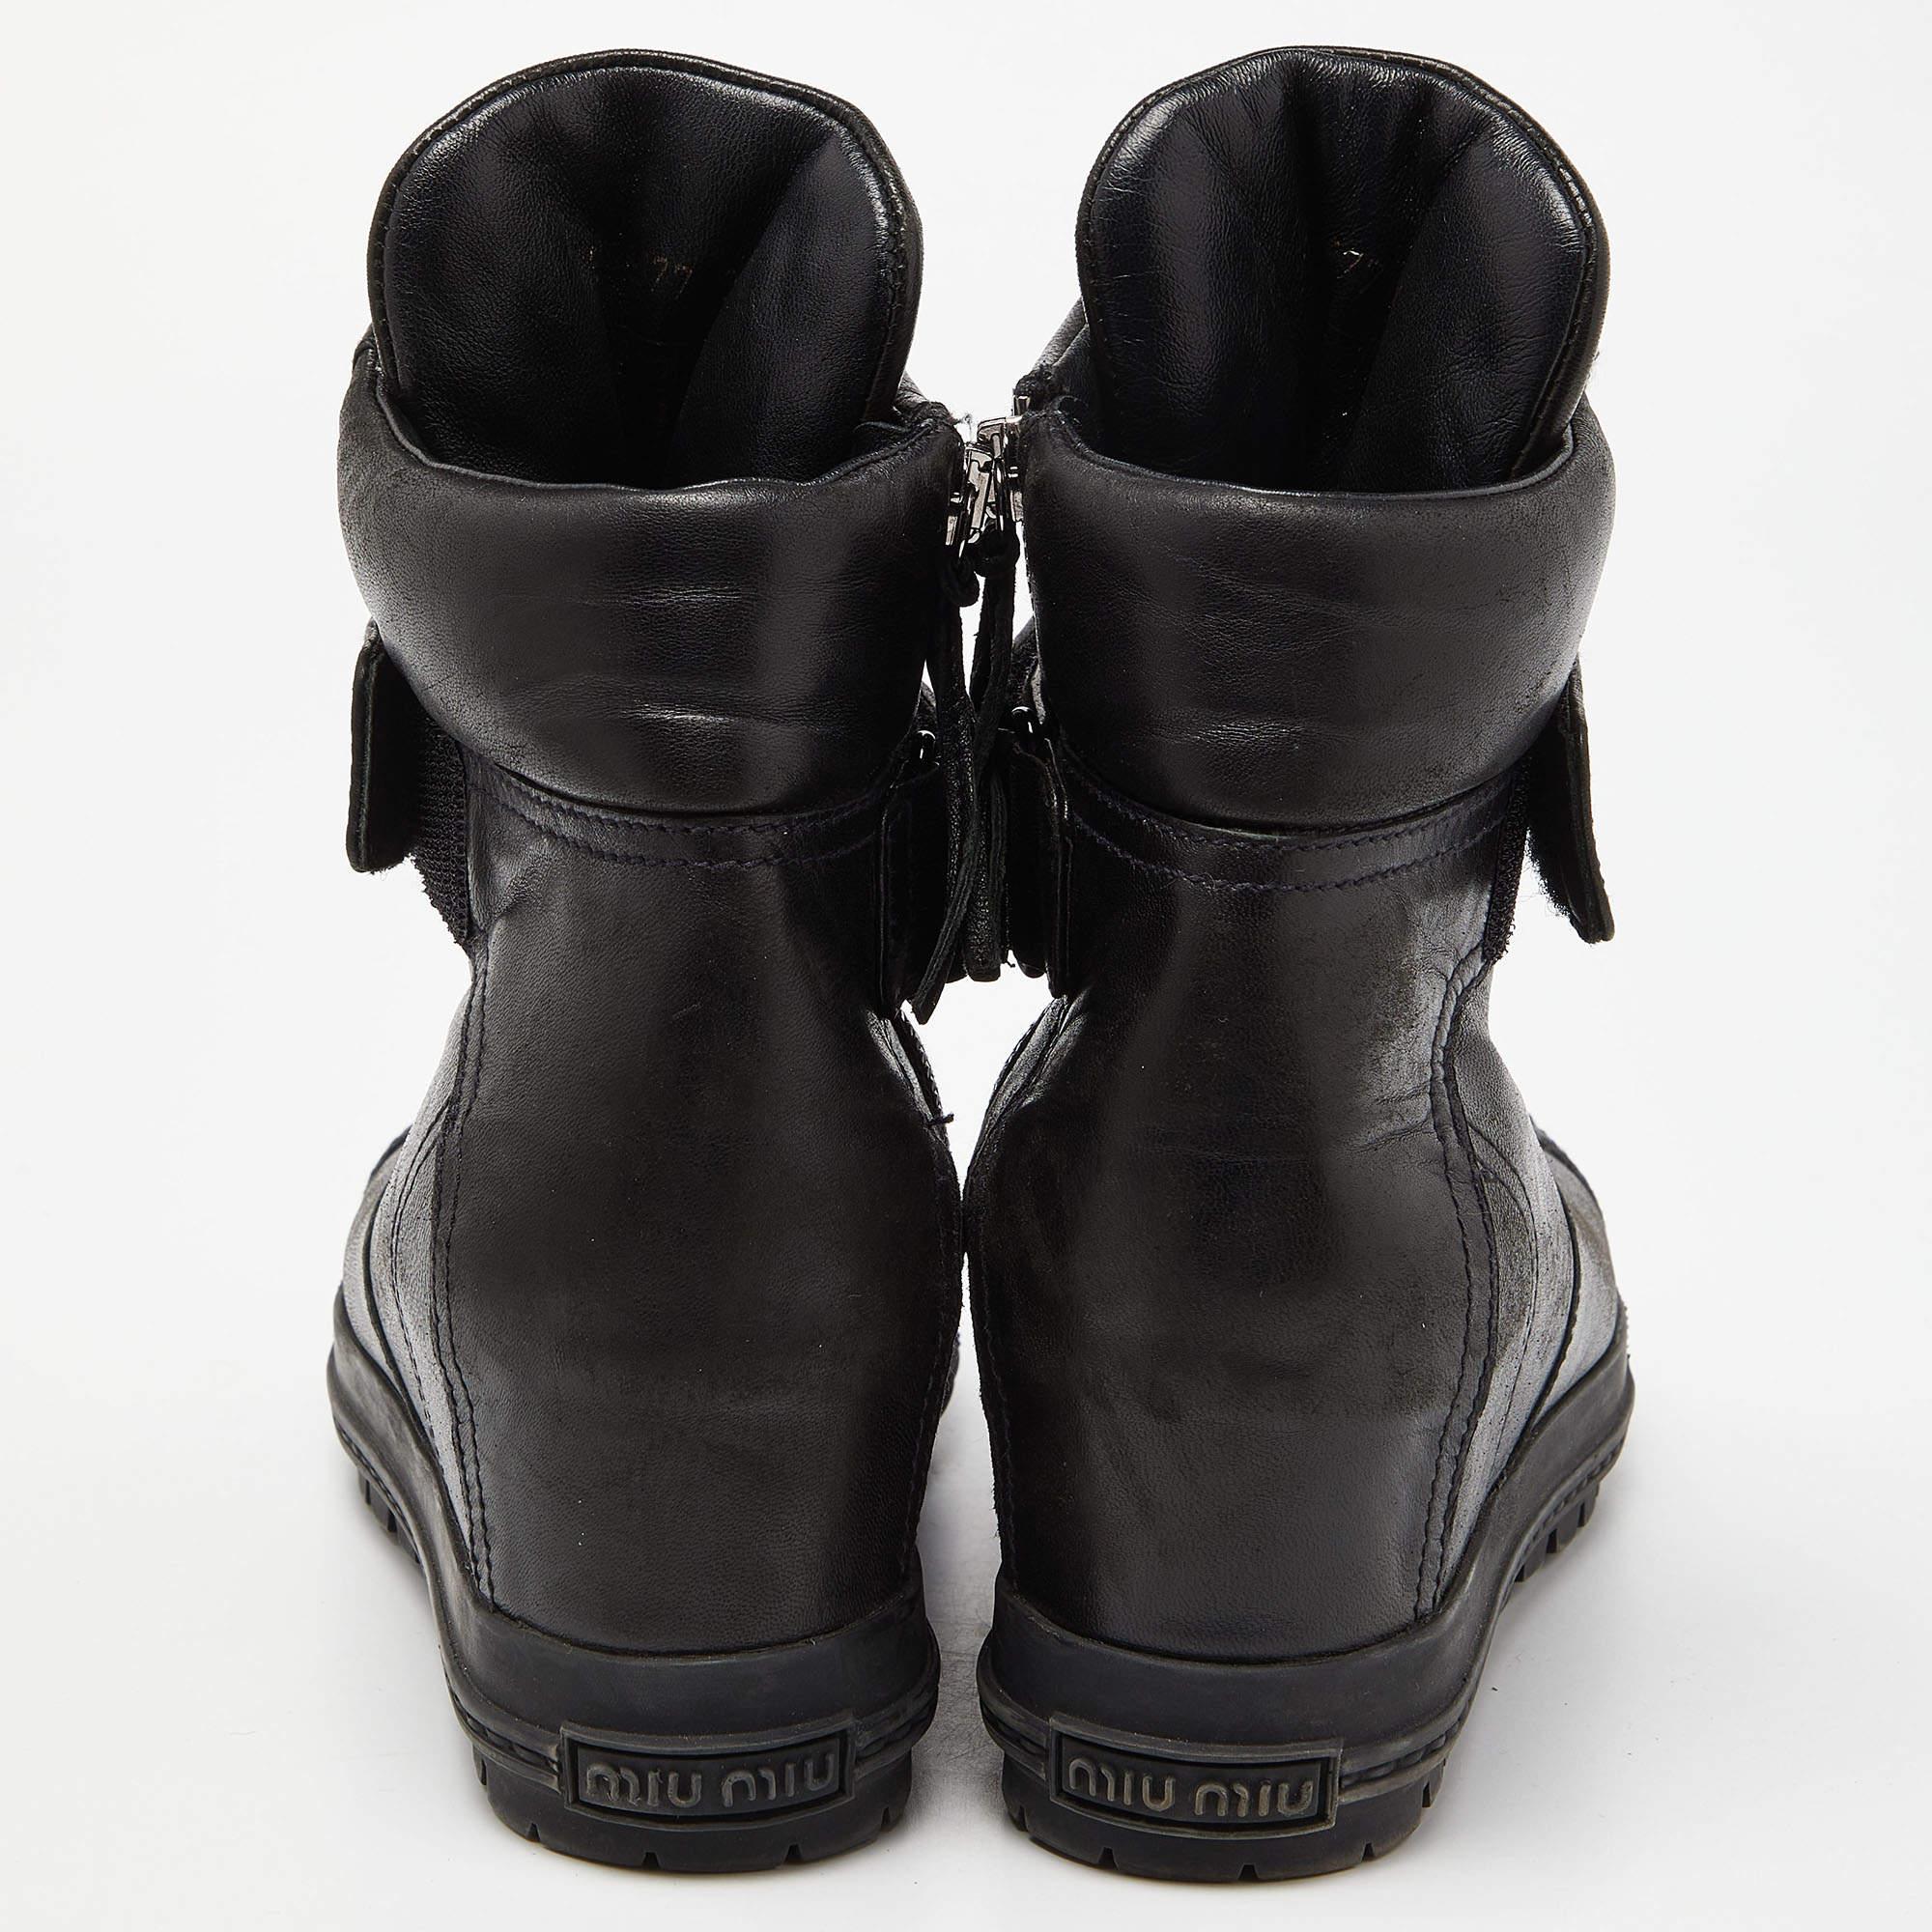 Miu Miu Black Leather Toe Cap Wedge Ankle Boots Size 38.5 For Sale 2